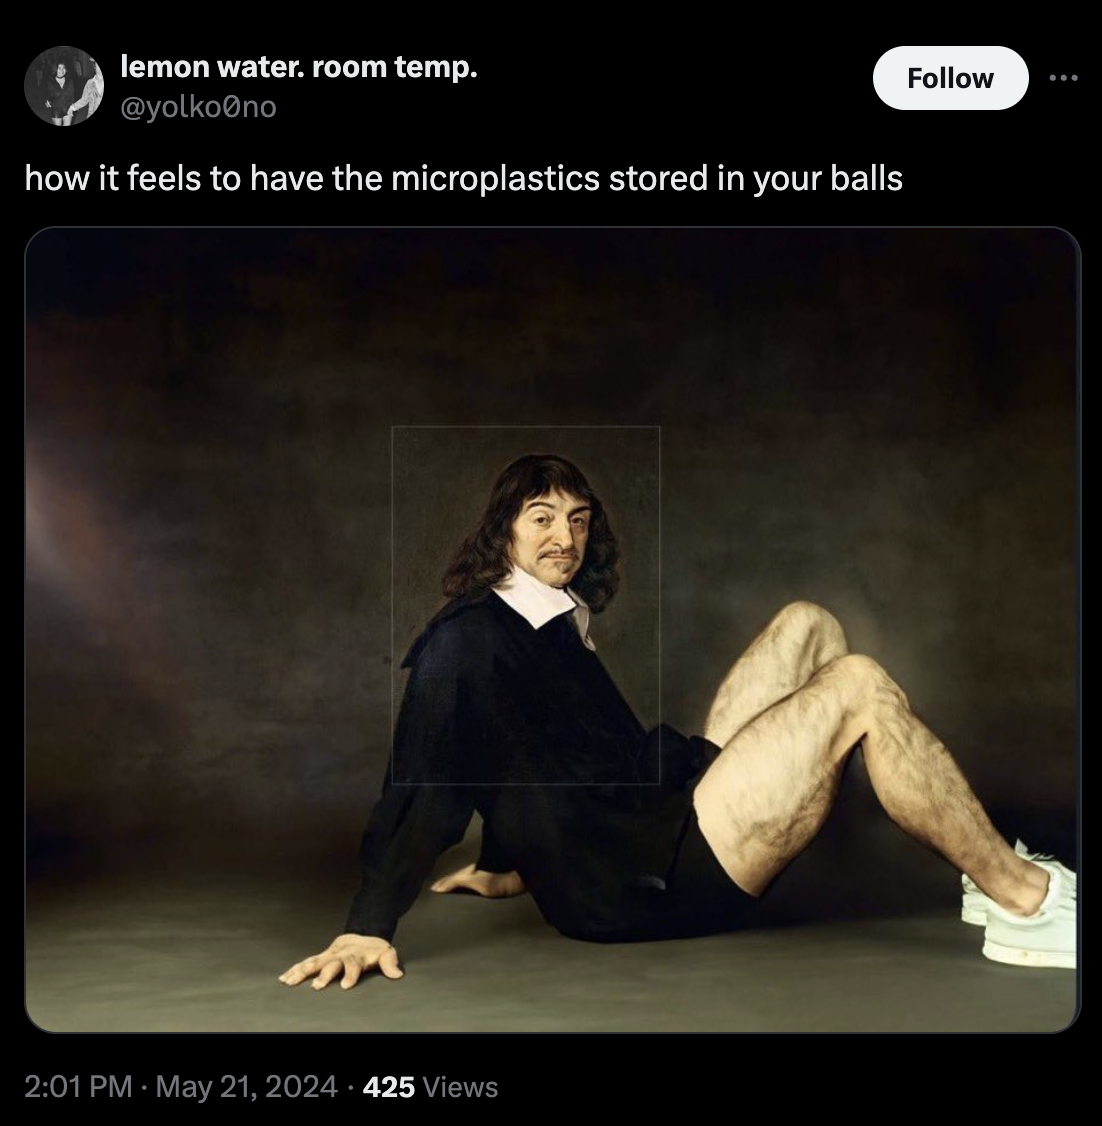 descartes portrait expanded - lemon water. room temp. no how it feels to have the microplastics stored in your balls 425 Views